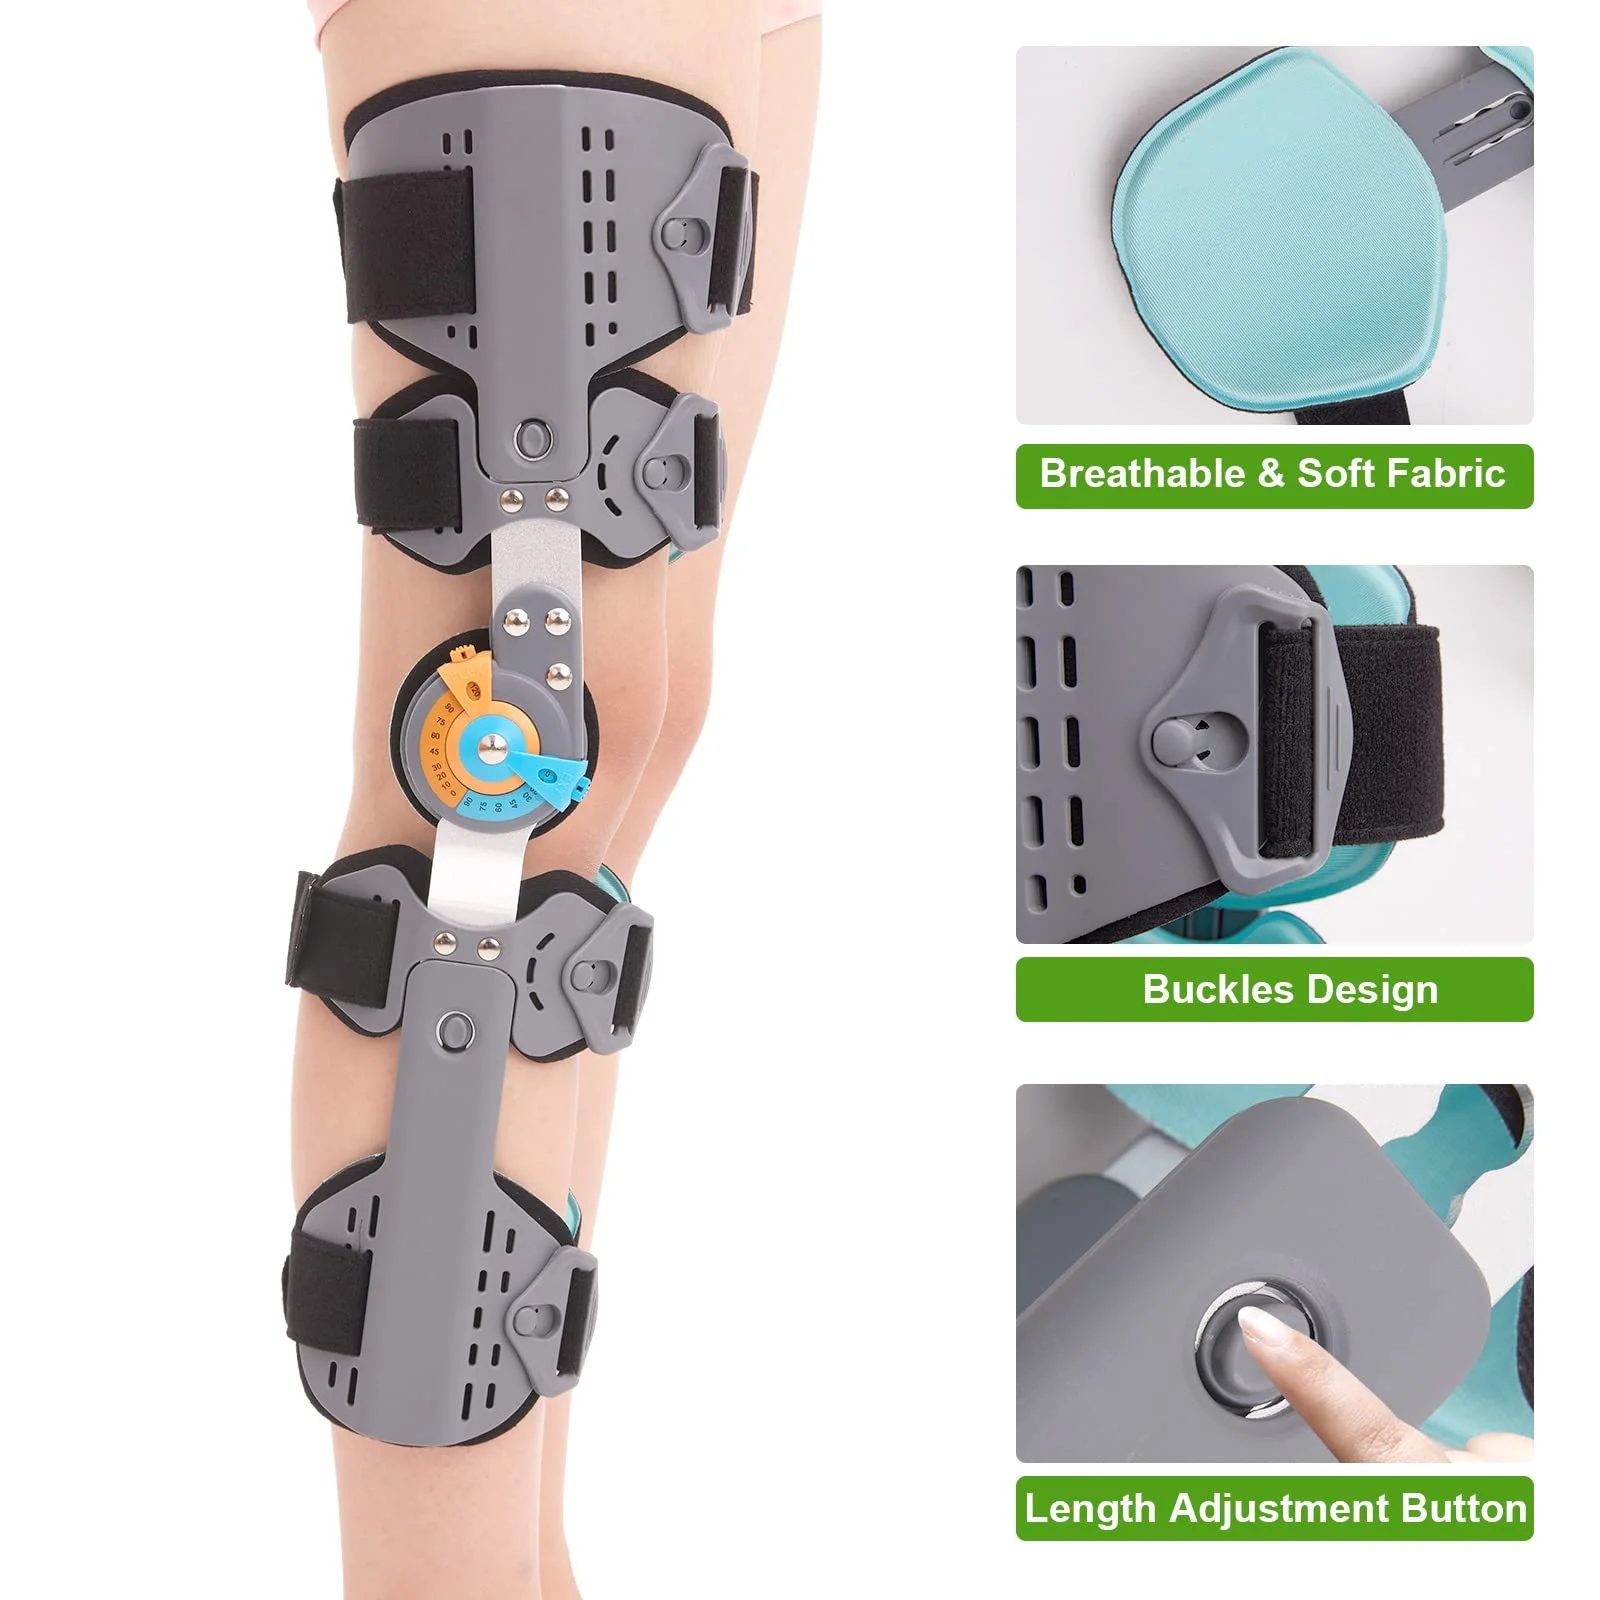 Tairibousy Hinged Knee Brace Rom Post Op Knee Immobilizer